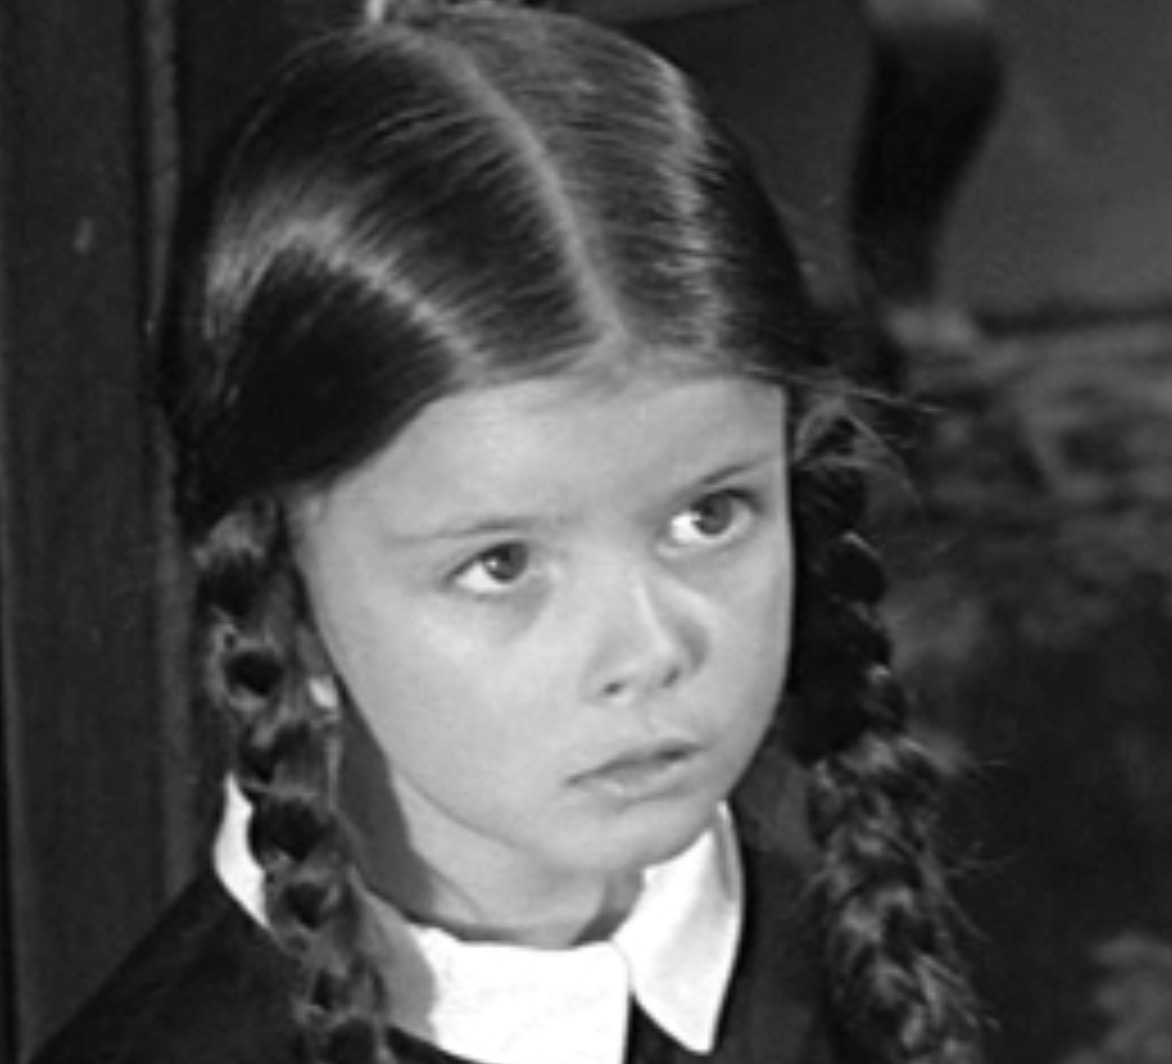 Do You Remember the Original Wednesday Addams? Our Hearts are Broken | In the 1960s, the world was first introduced to The Addams Family via its original sitcom. Subsequently, that would also be the moment we were all introduced to the original Wednesday Addams played by Lisa Loring.